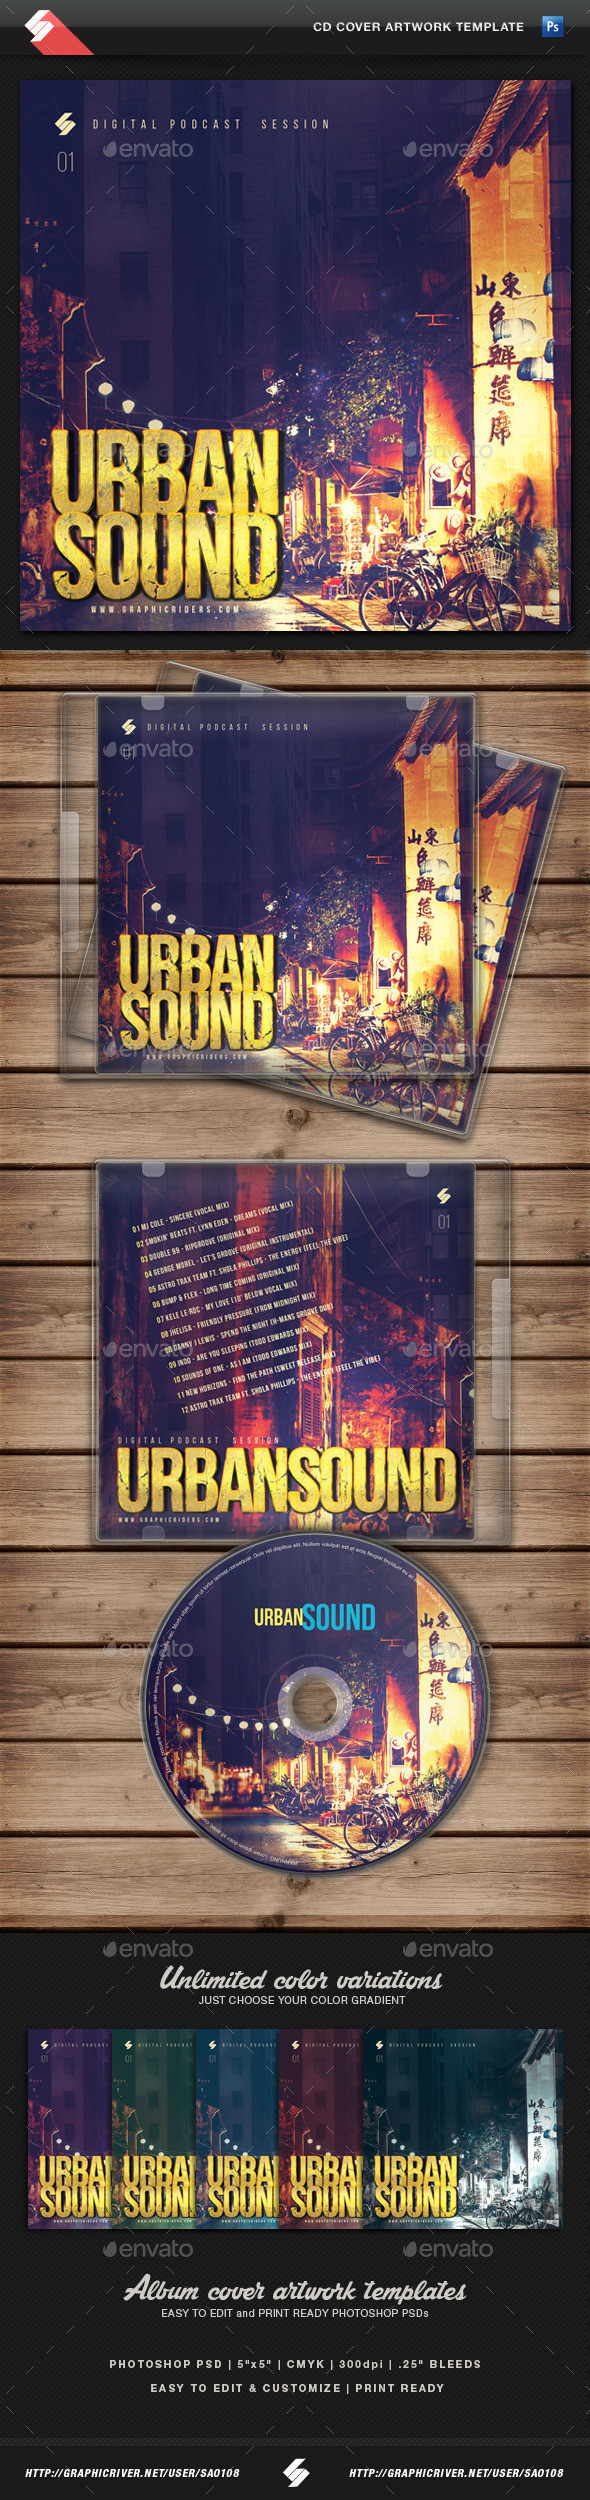 Urbansound cd cover template preview